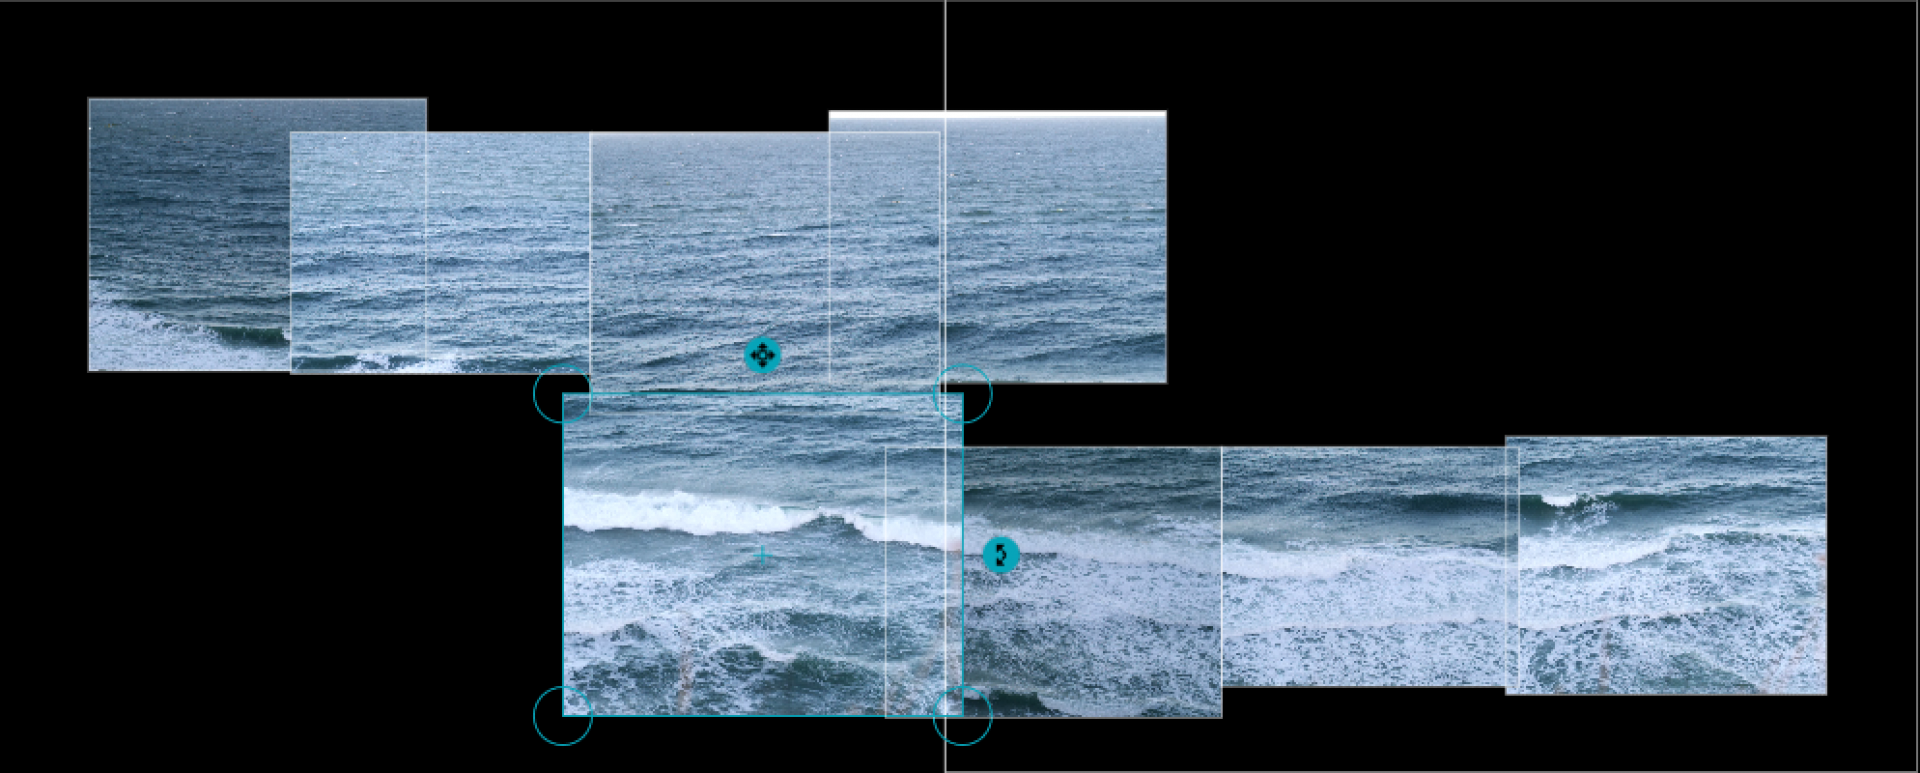 A spread of wave images